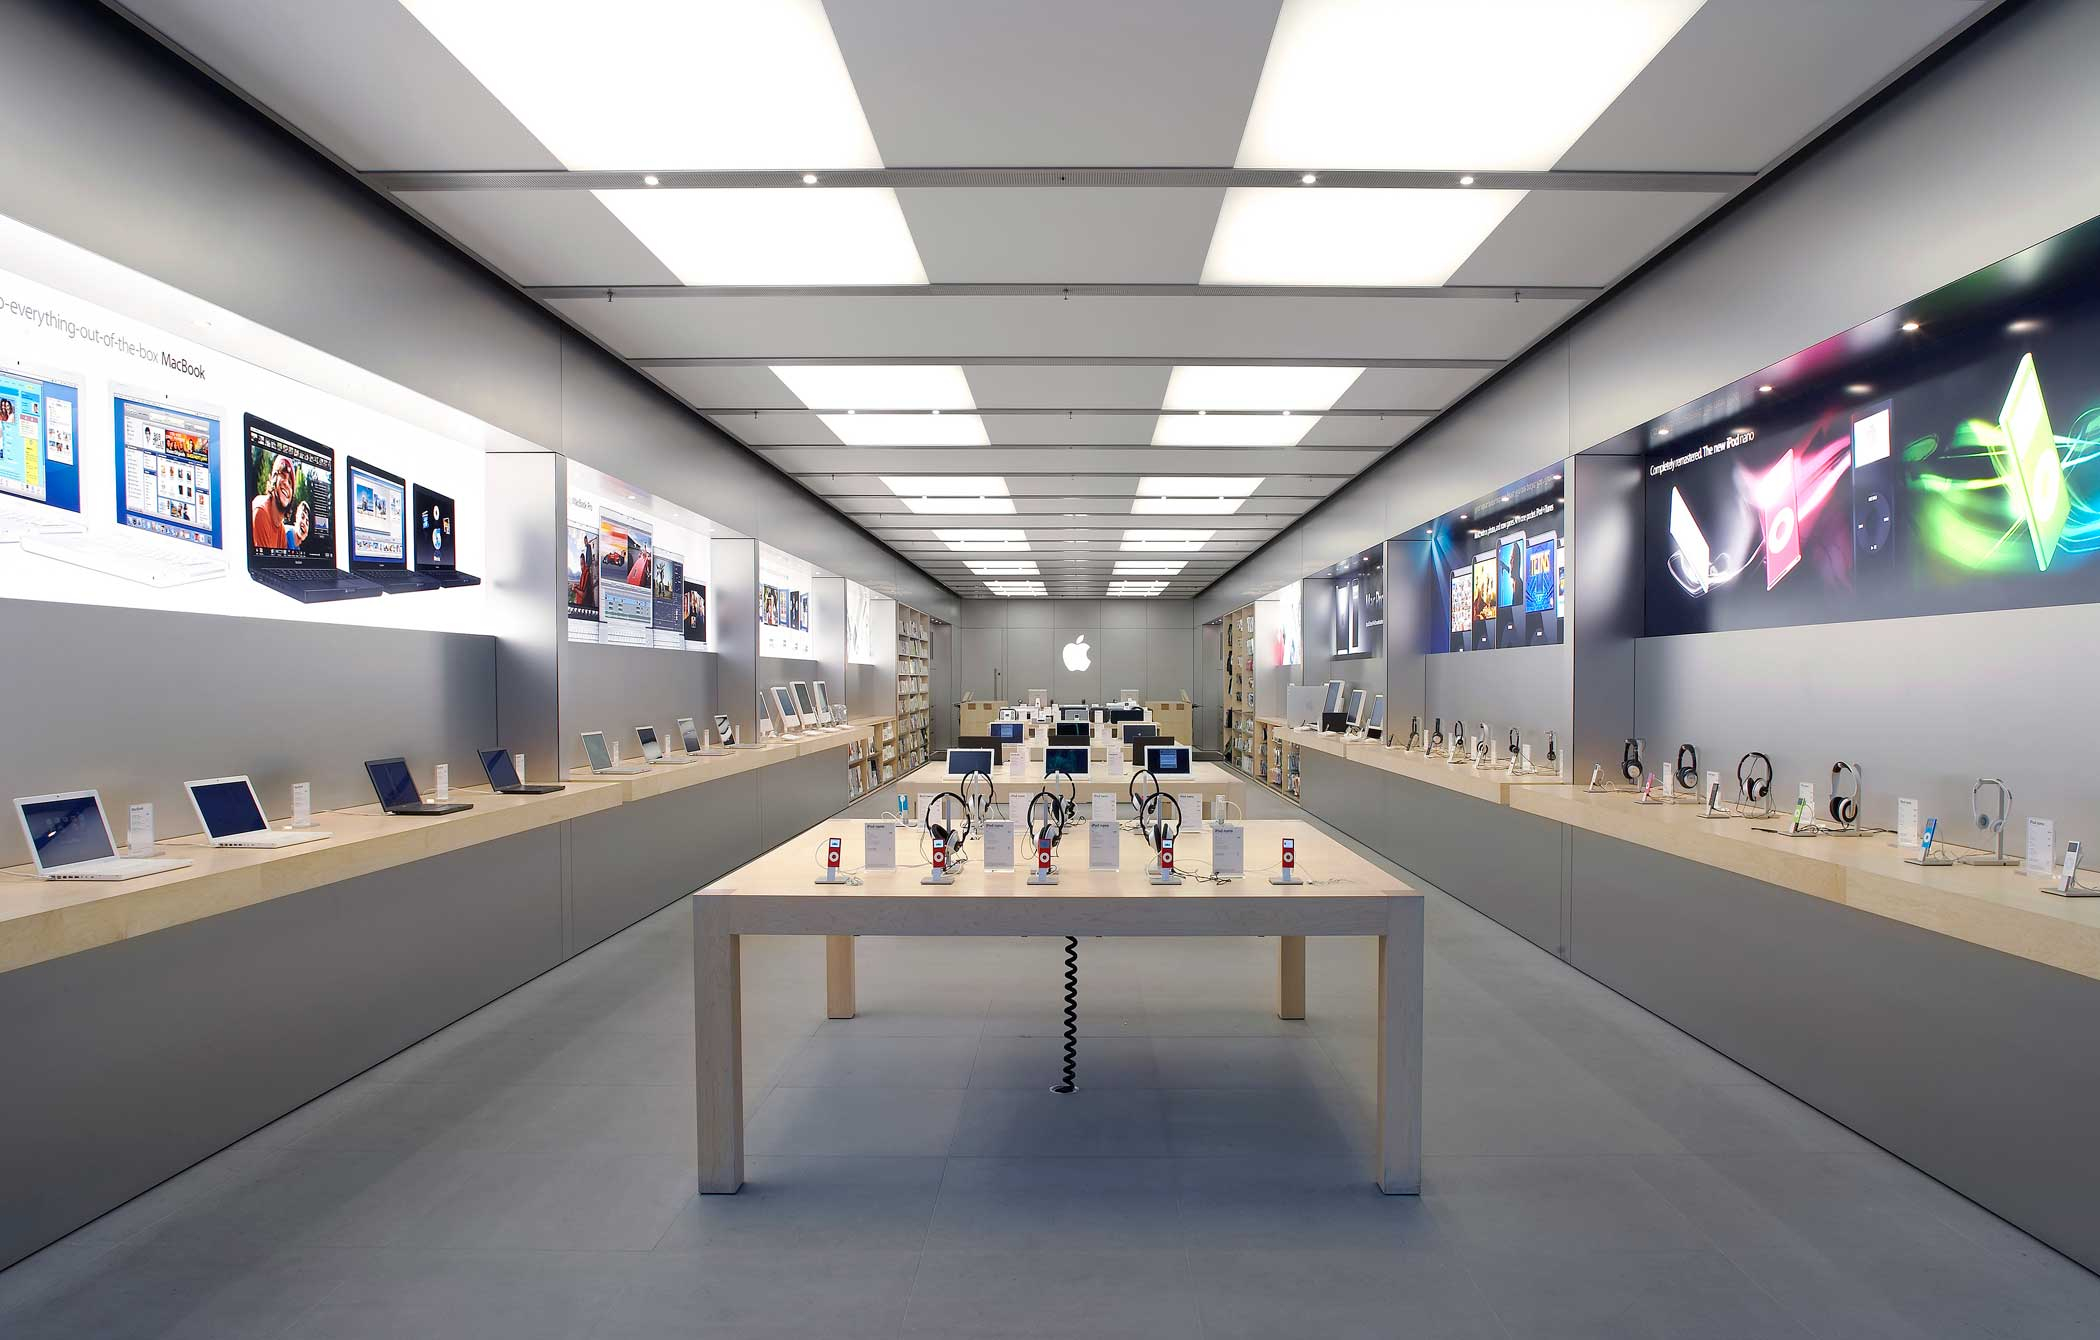 An Apple store in The Arndale Centre in Manchester, England.